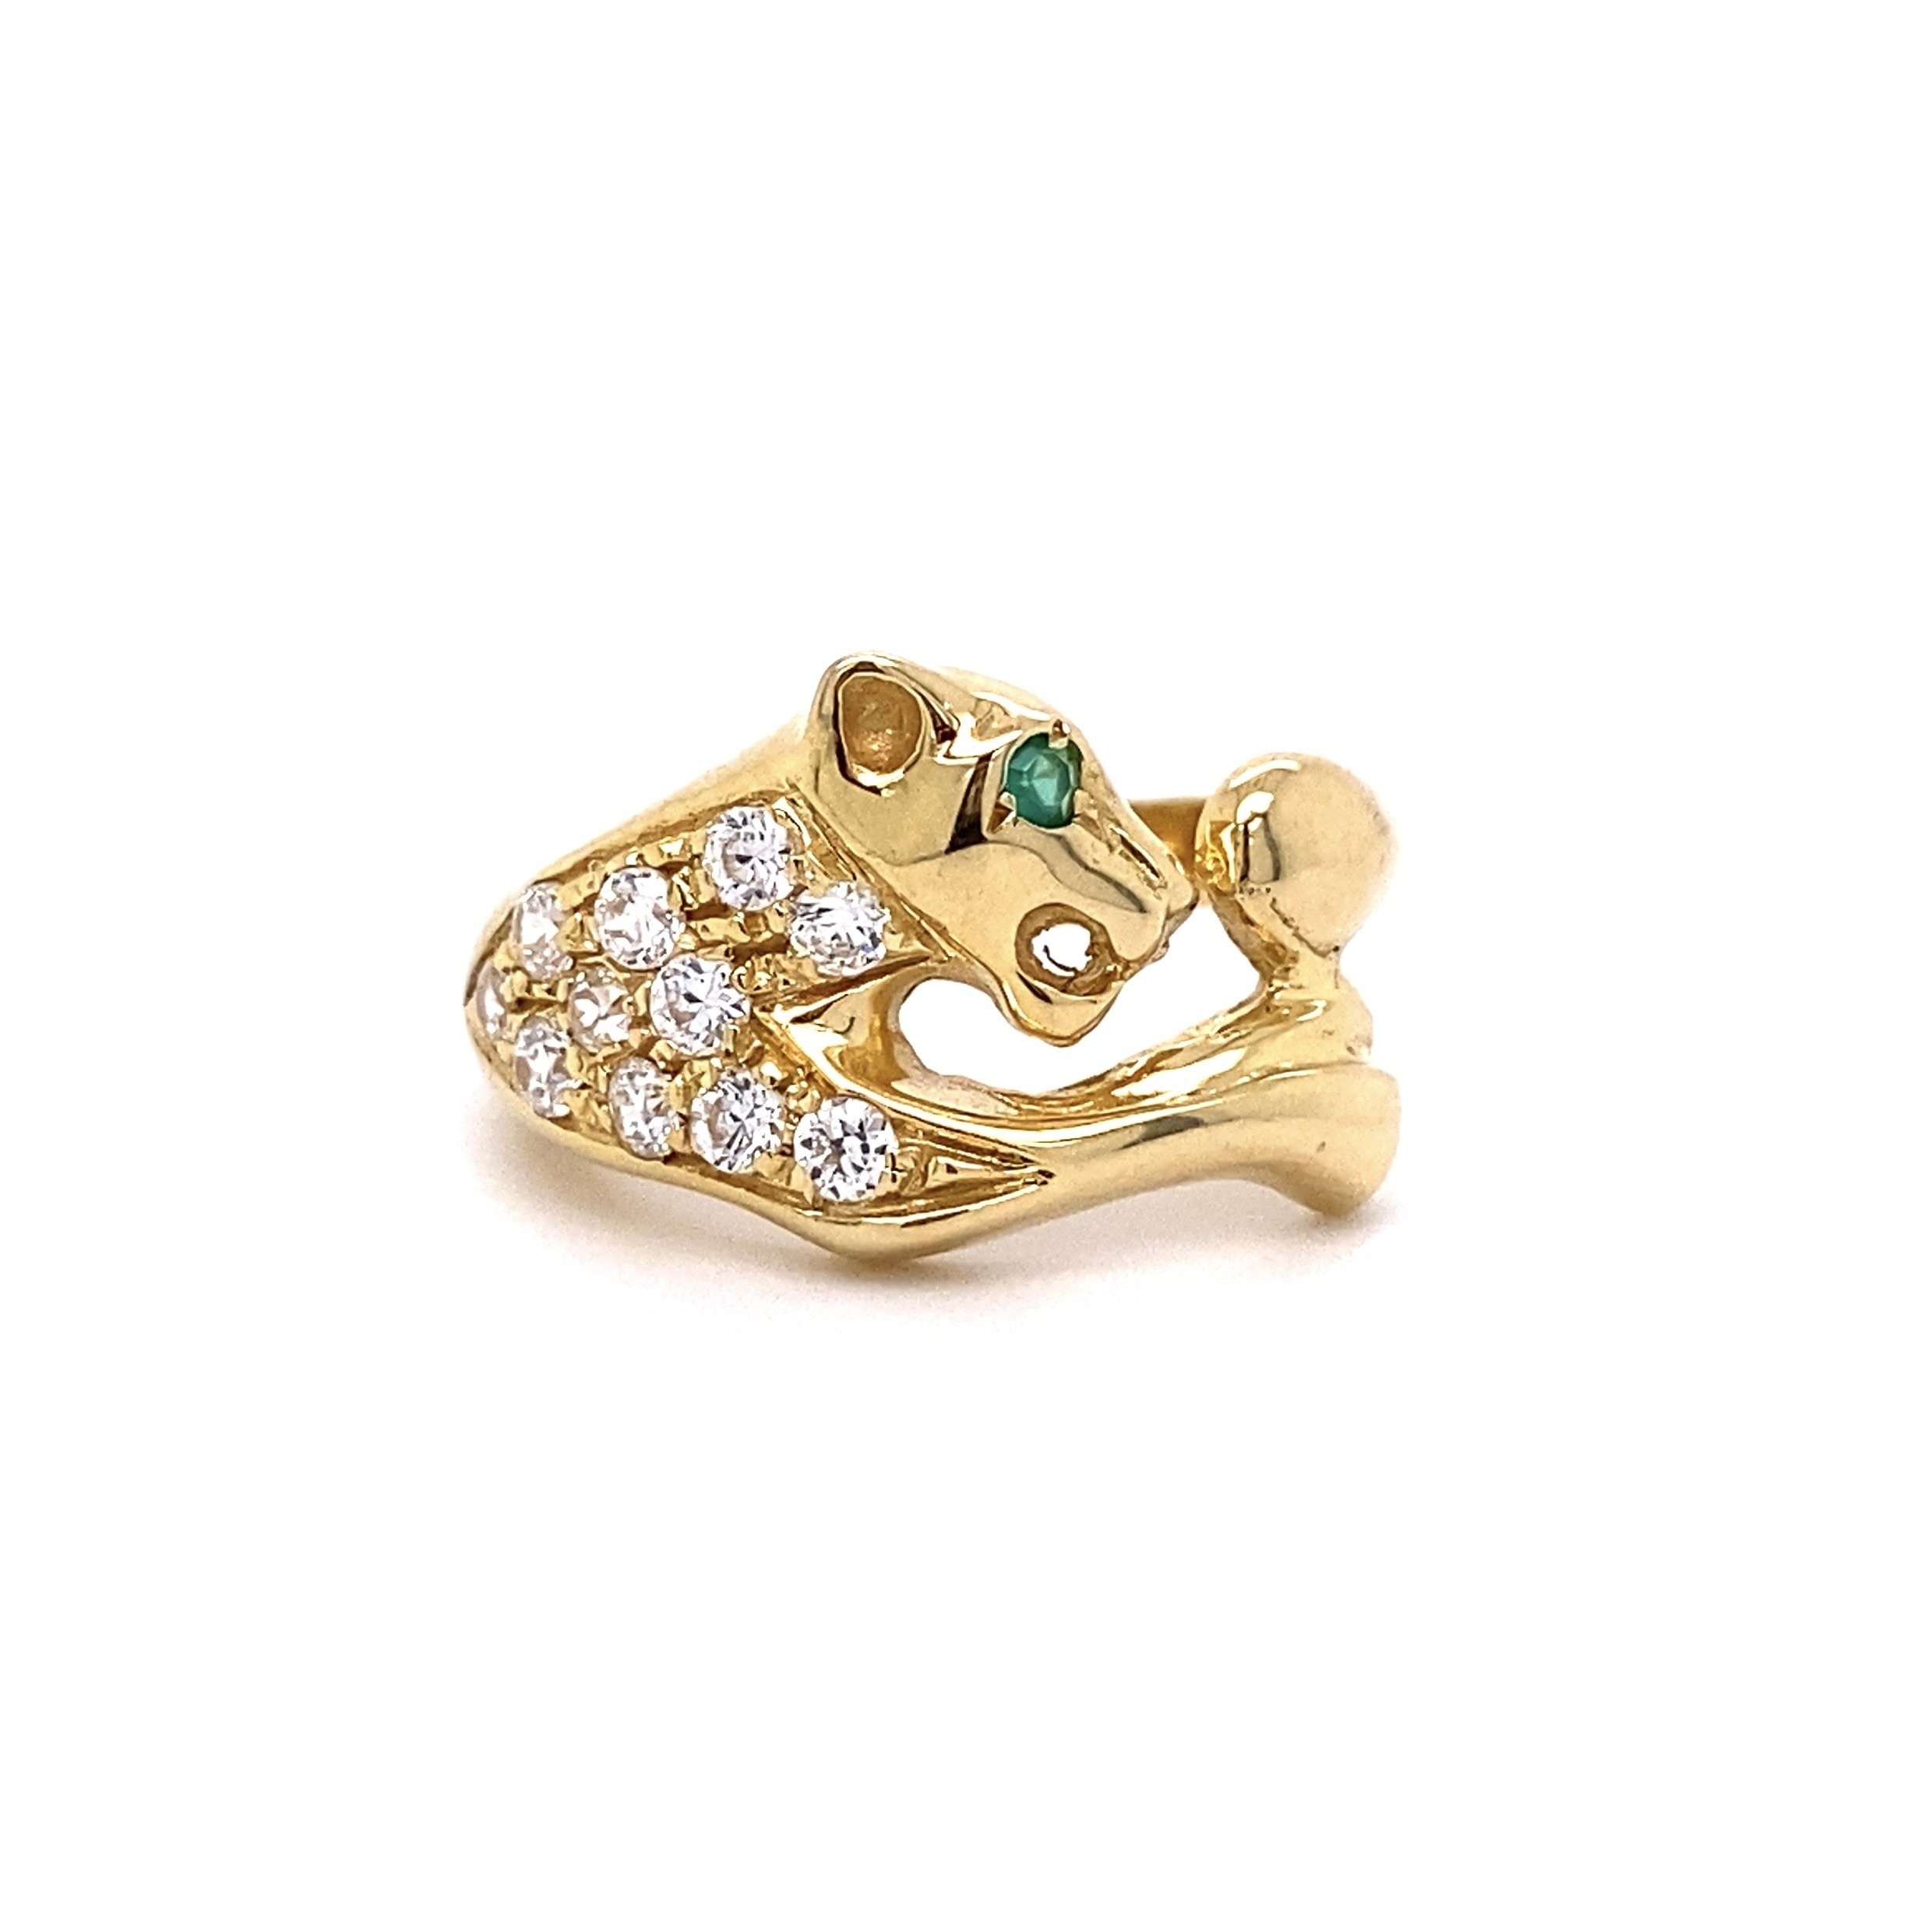 18K YG Italian Panther Ring with Green Stone & CZ's 5.0g, s10.5